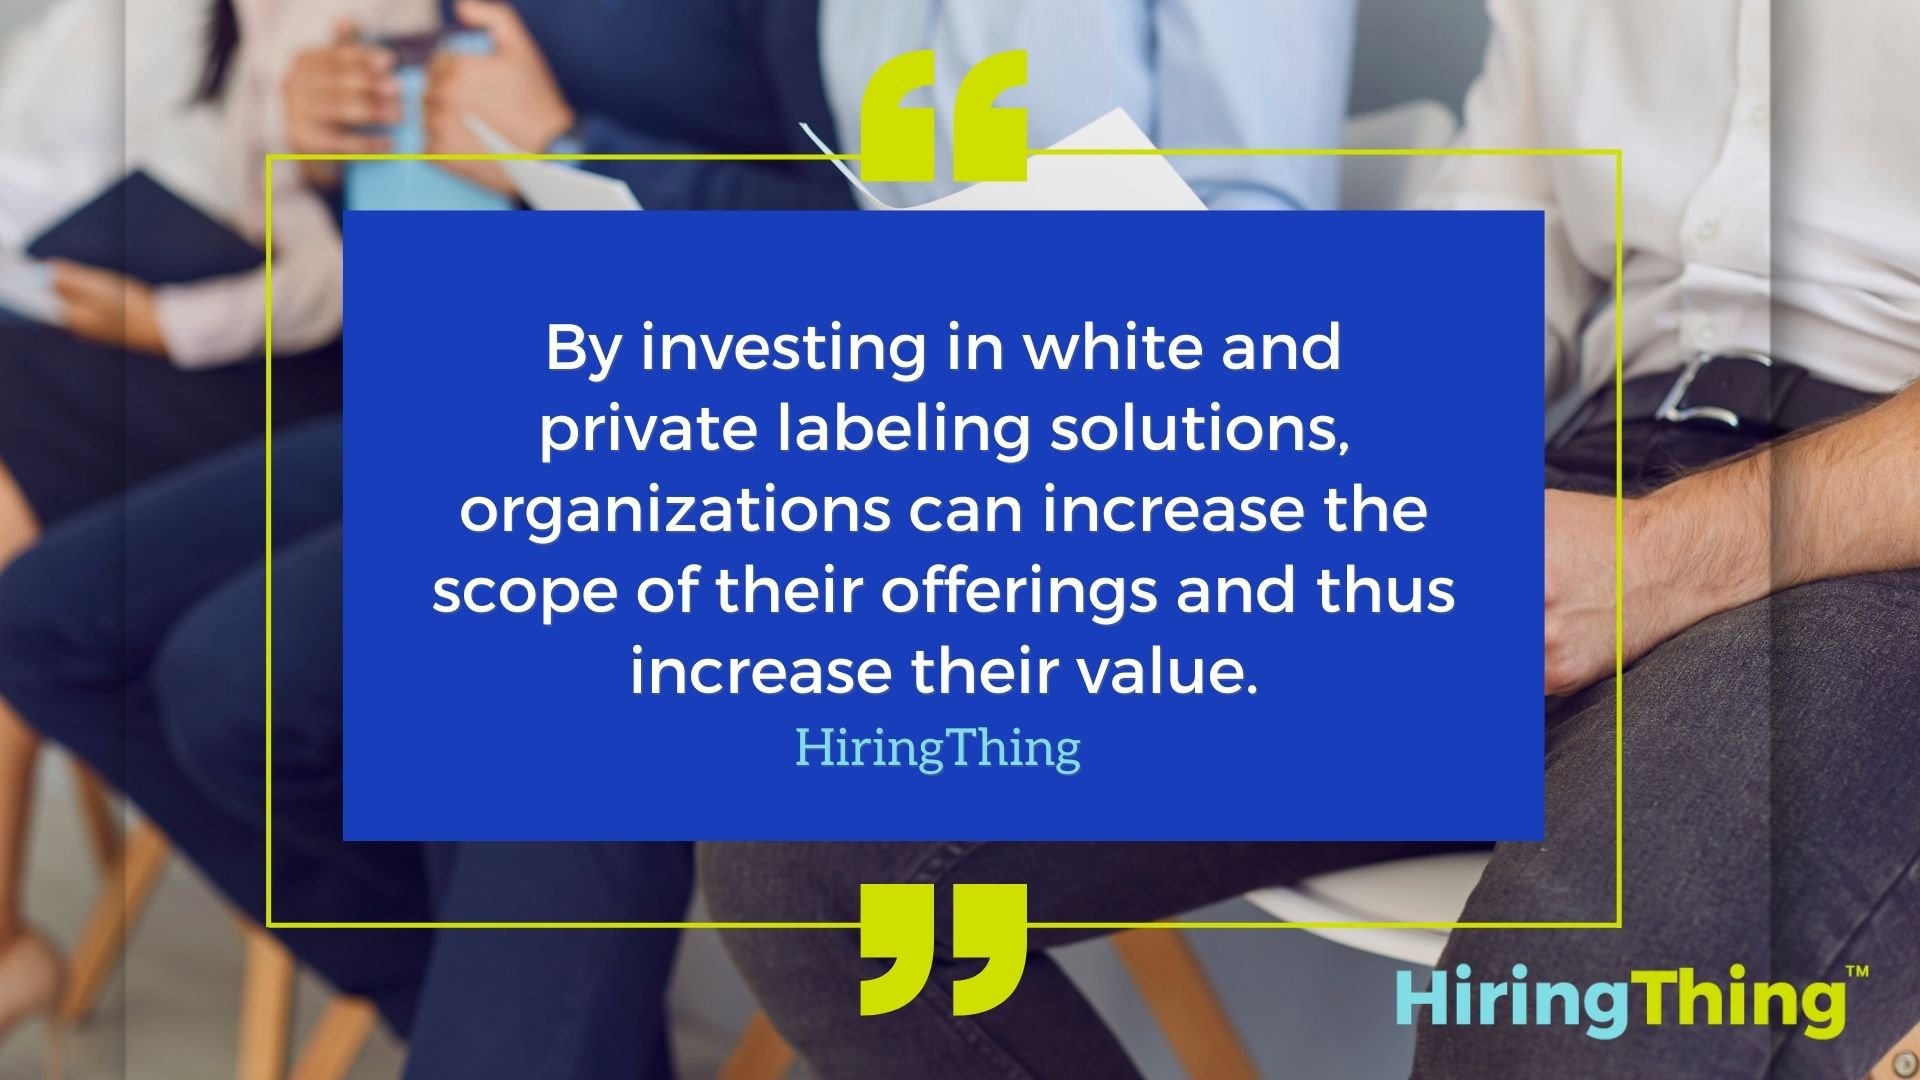 By investing in white and private labeling solutions, organizations can increase the scope of their offerings, and thus increase their value.